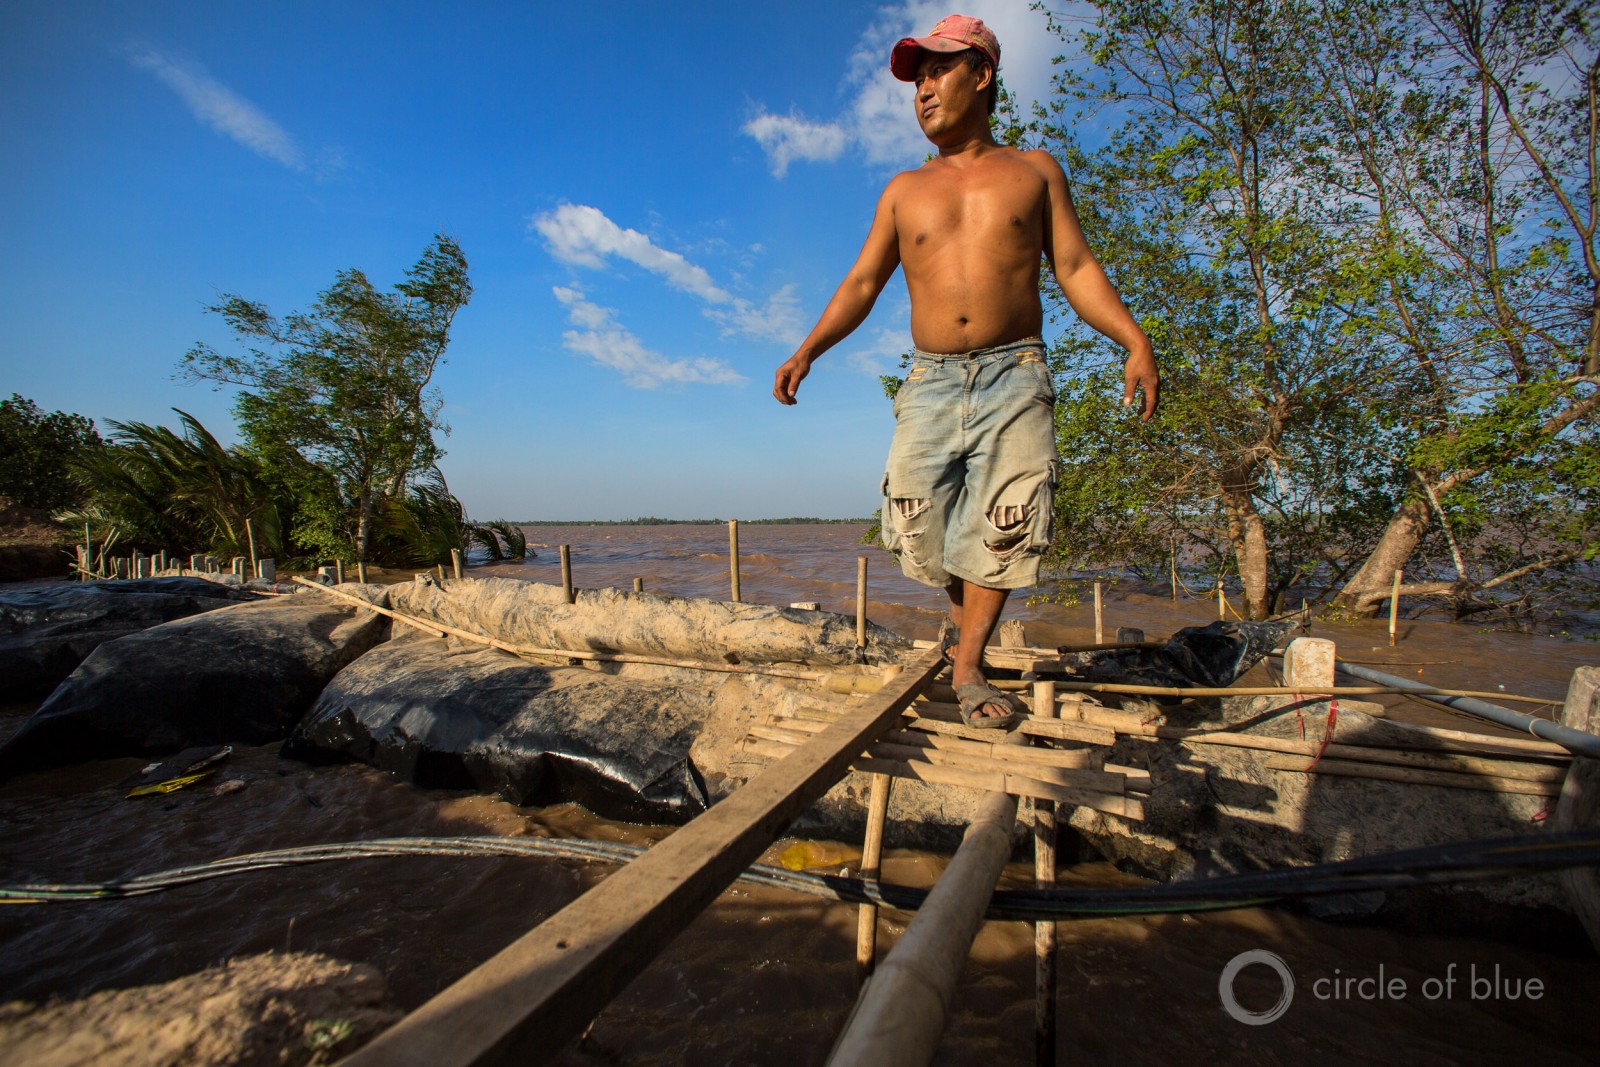 Mekong River floodwaters force Vietnamese farmers to erect barricades to protect their fields. From 1980 to 2014, 41 percent of all the economic losses globally, and 27 percent of the fatalities, were from one source: flooding rivers. Photo © J. Carl Ganter / Circle of Blue